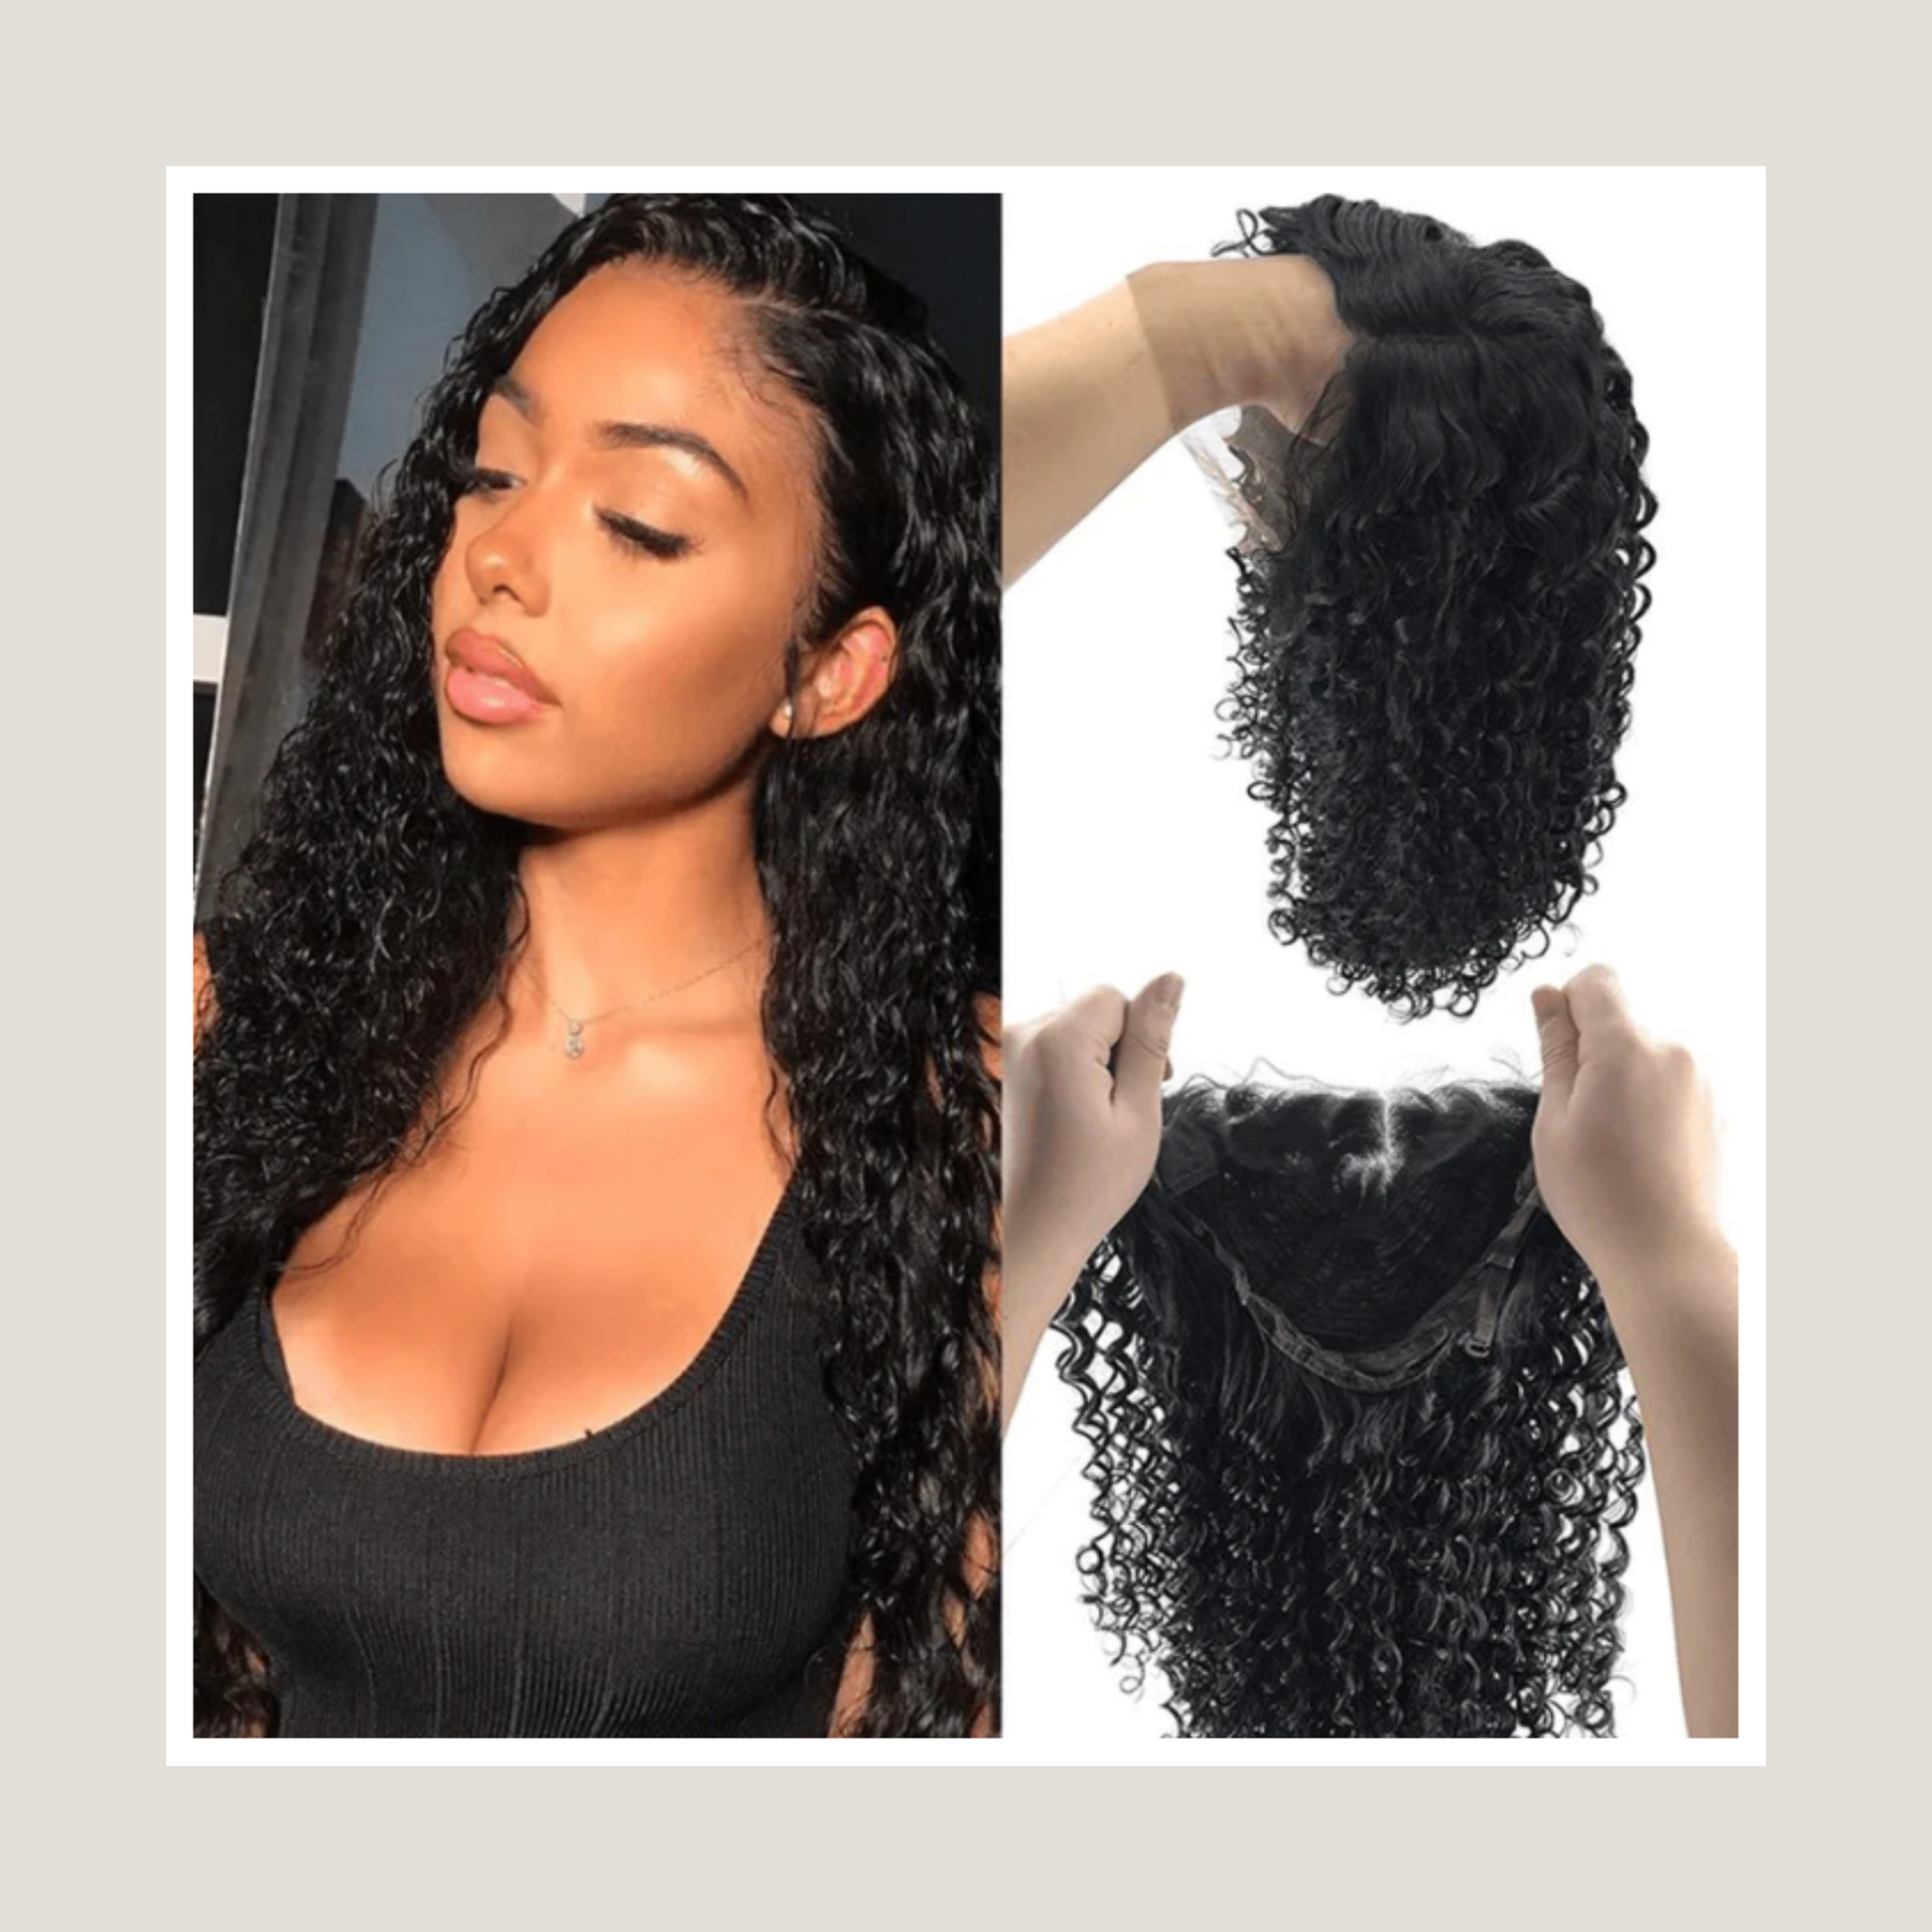 All About Human Hair Wigs –